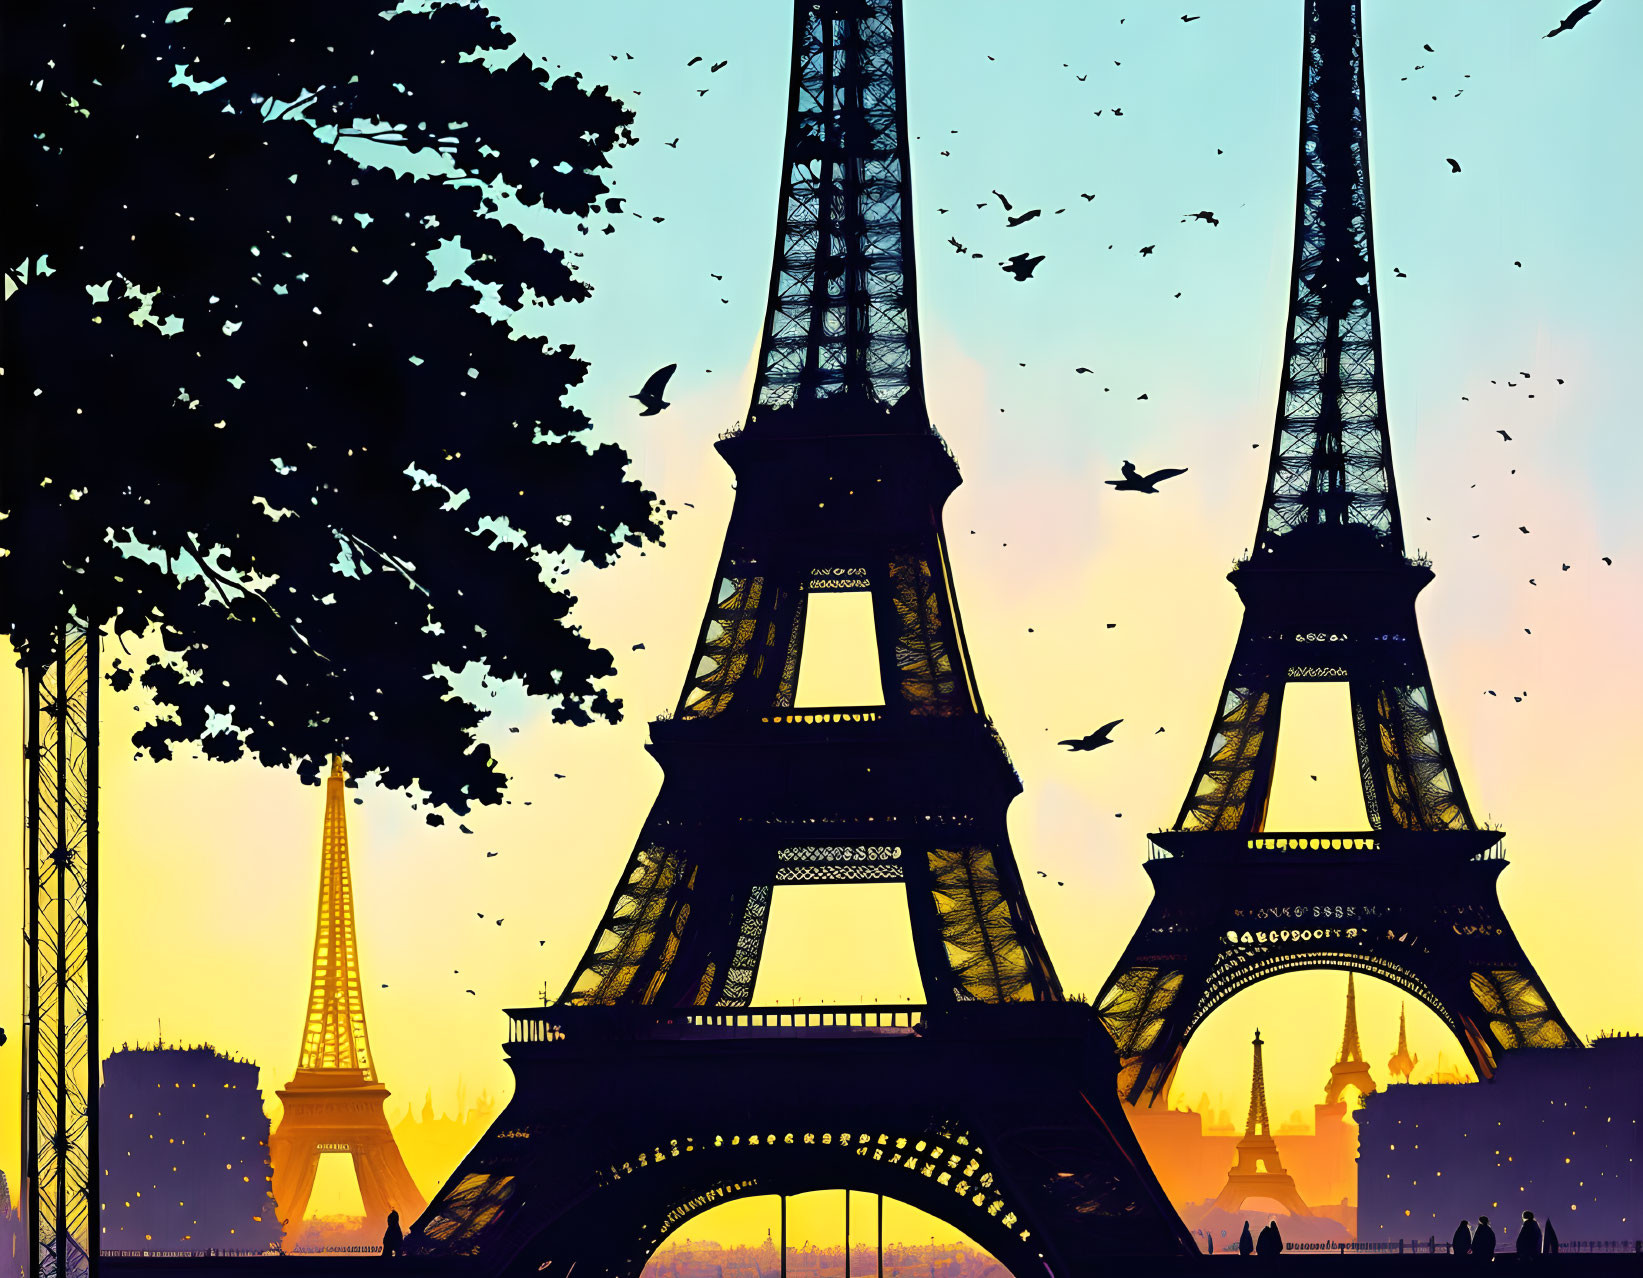 Surreal illustration of overlapping Eiffel Towers at sunset